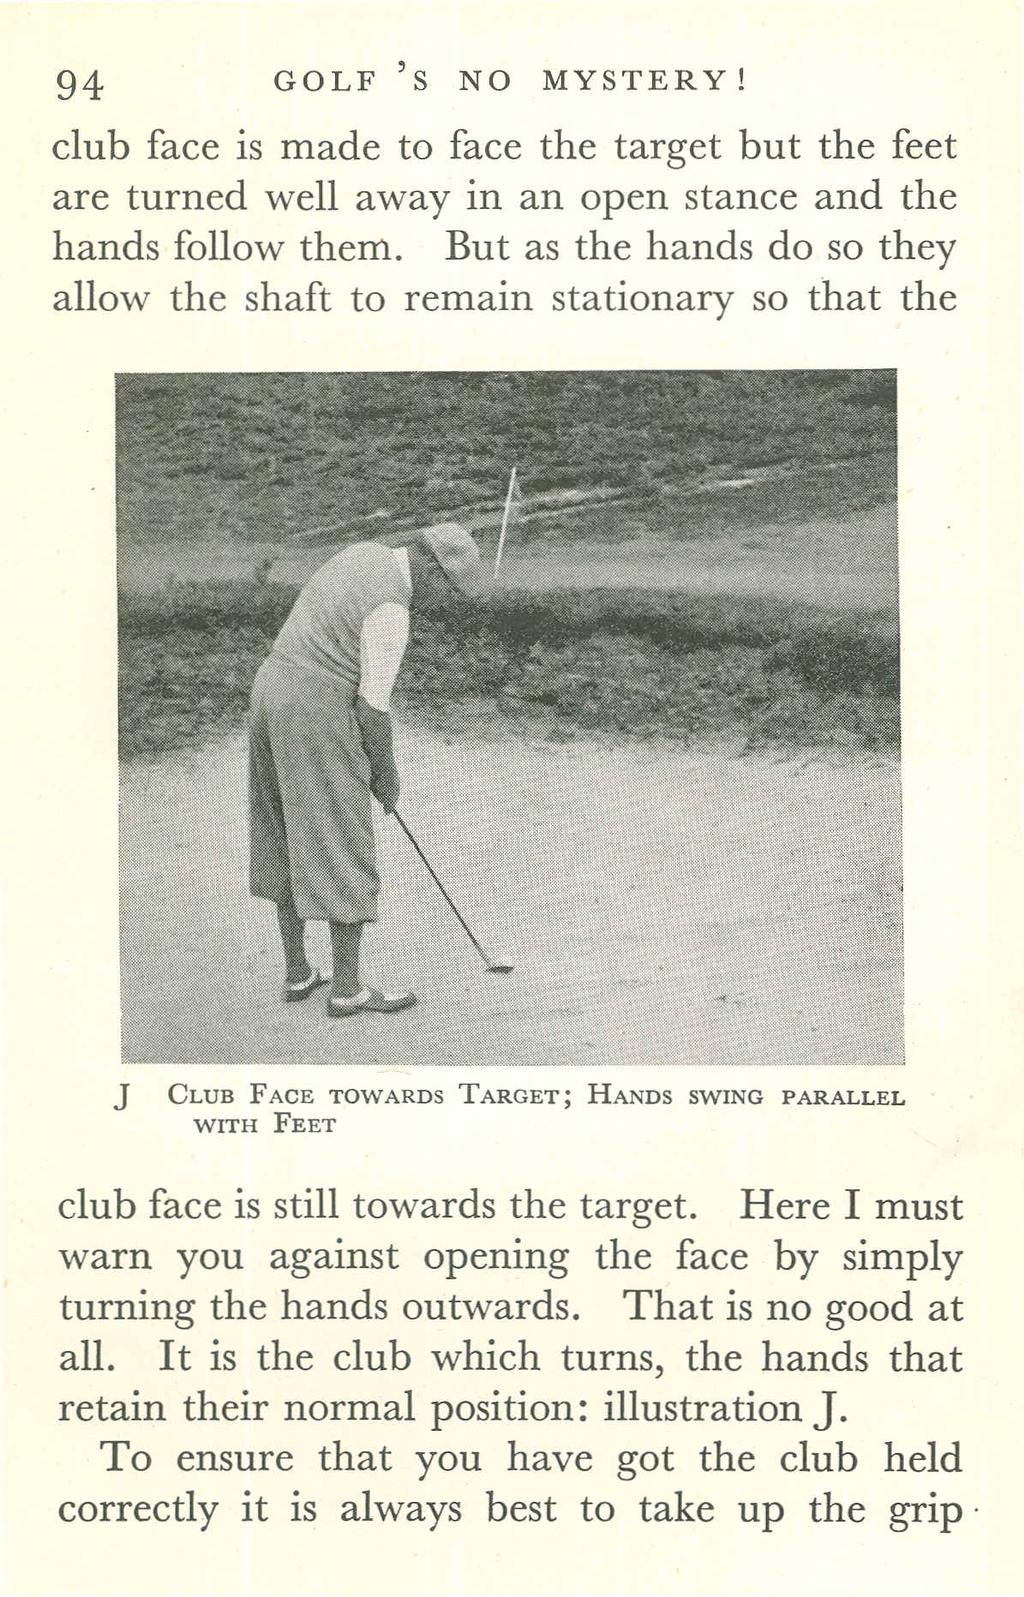 94 GOLF'S NO MYSTERY! club face is made to face the target but the feet are turned well away in an open stance and the hands follow them.